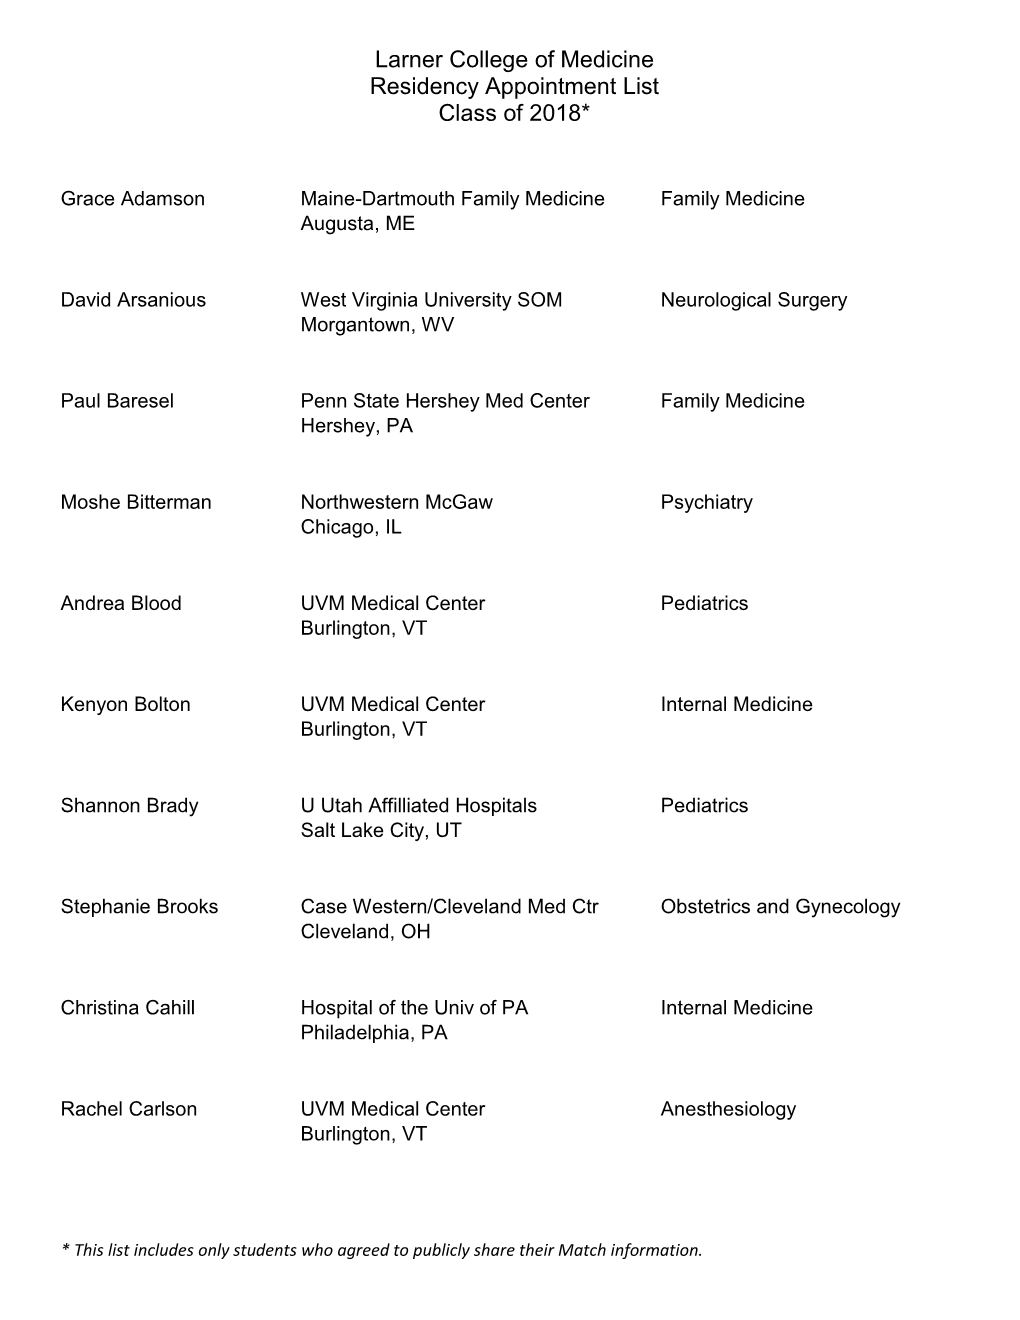 Larner College of Medicine Residency Appointment List Class of 2018*